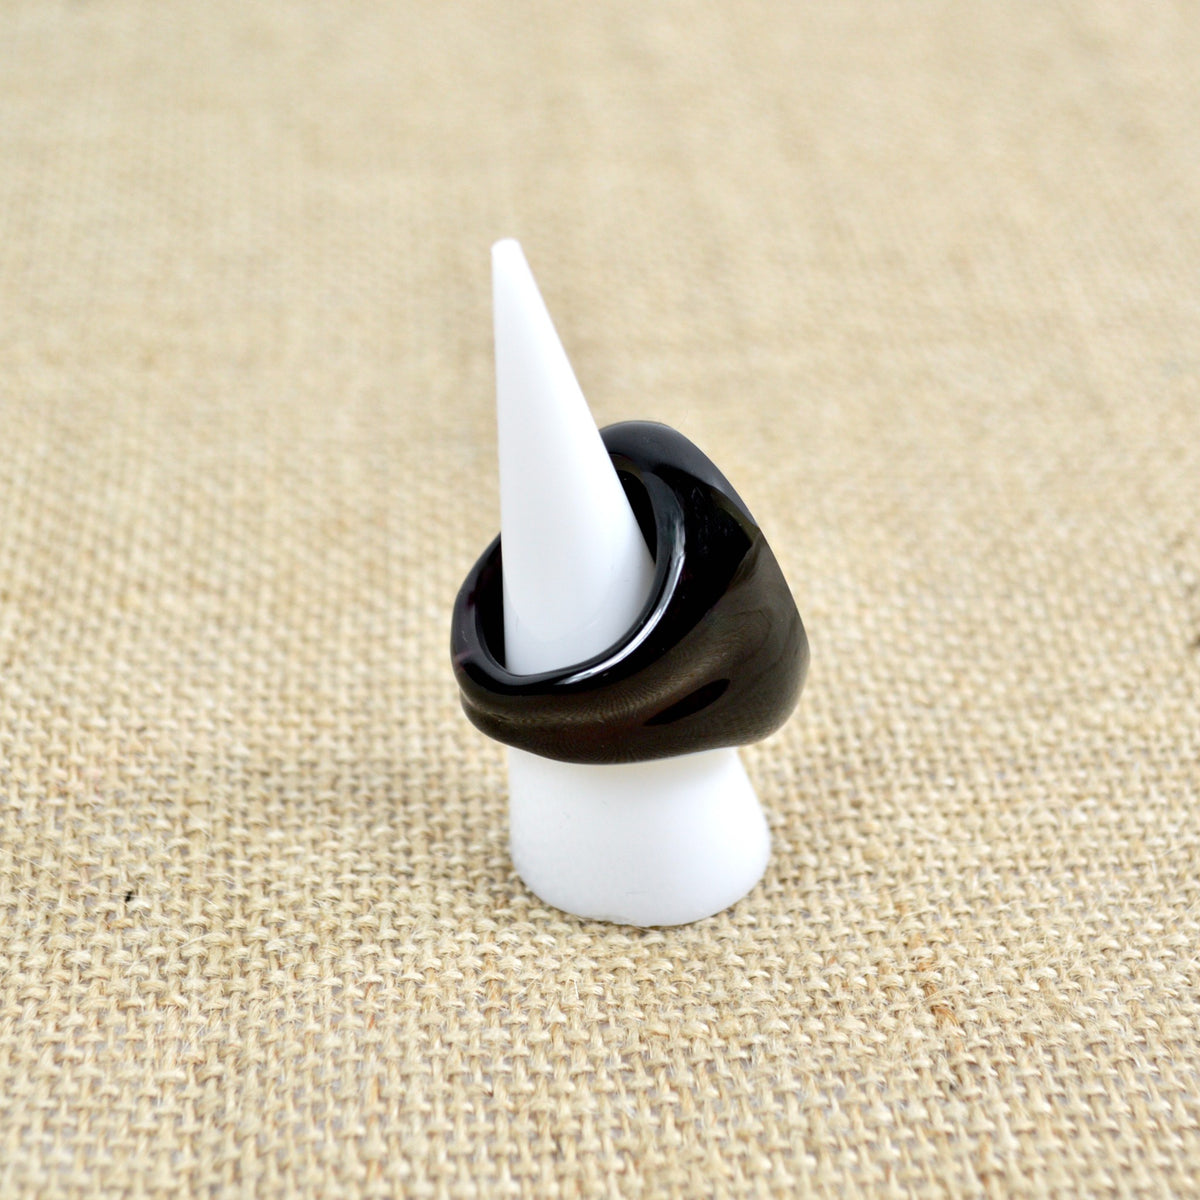 Murano Glass Statement Ring, Black &amp; Taupe, Handcrafted In Italy - My Italian Decor